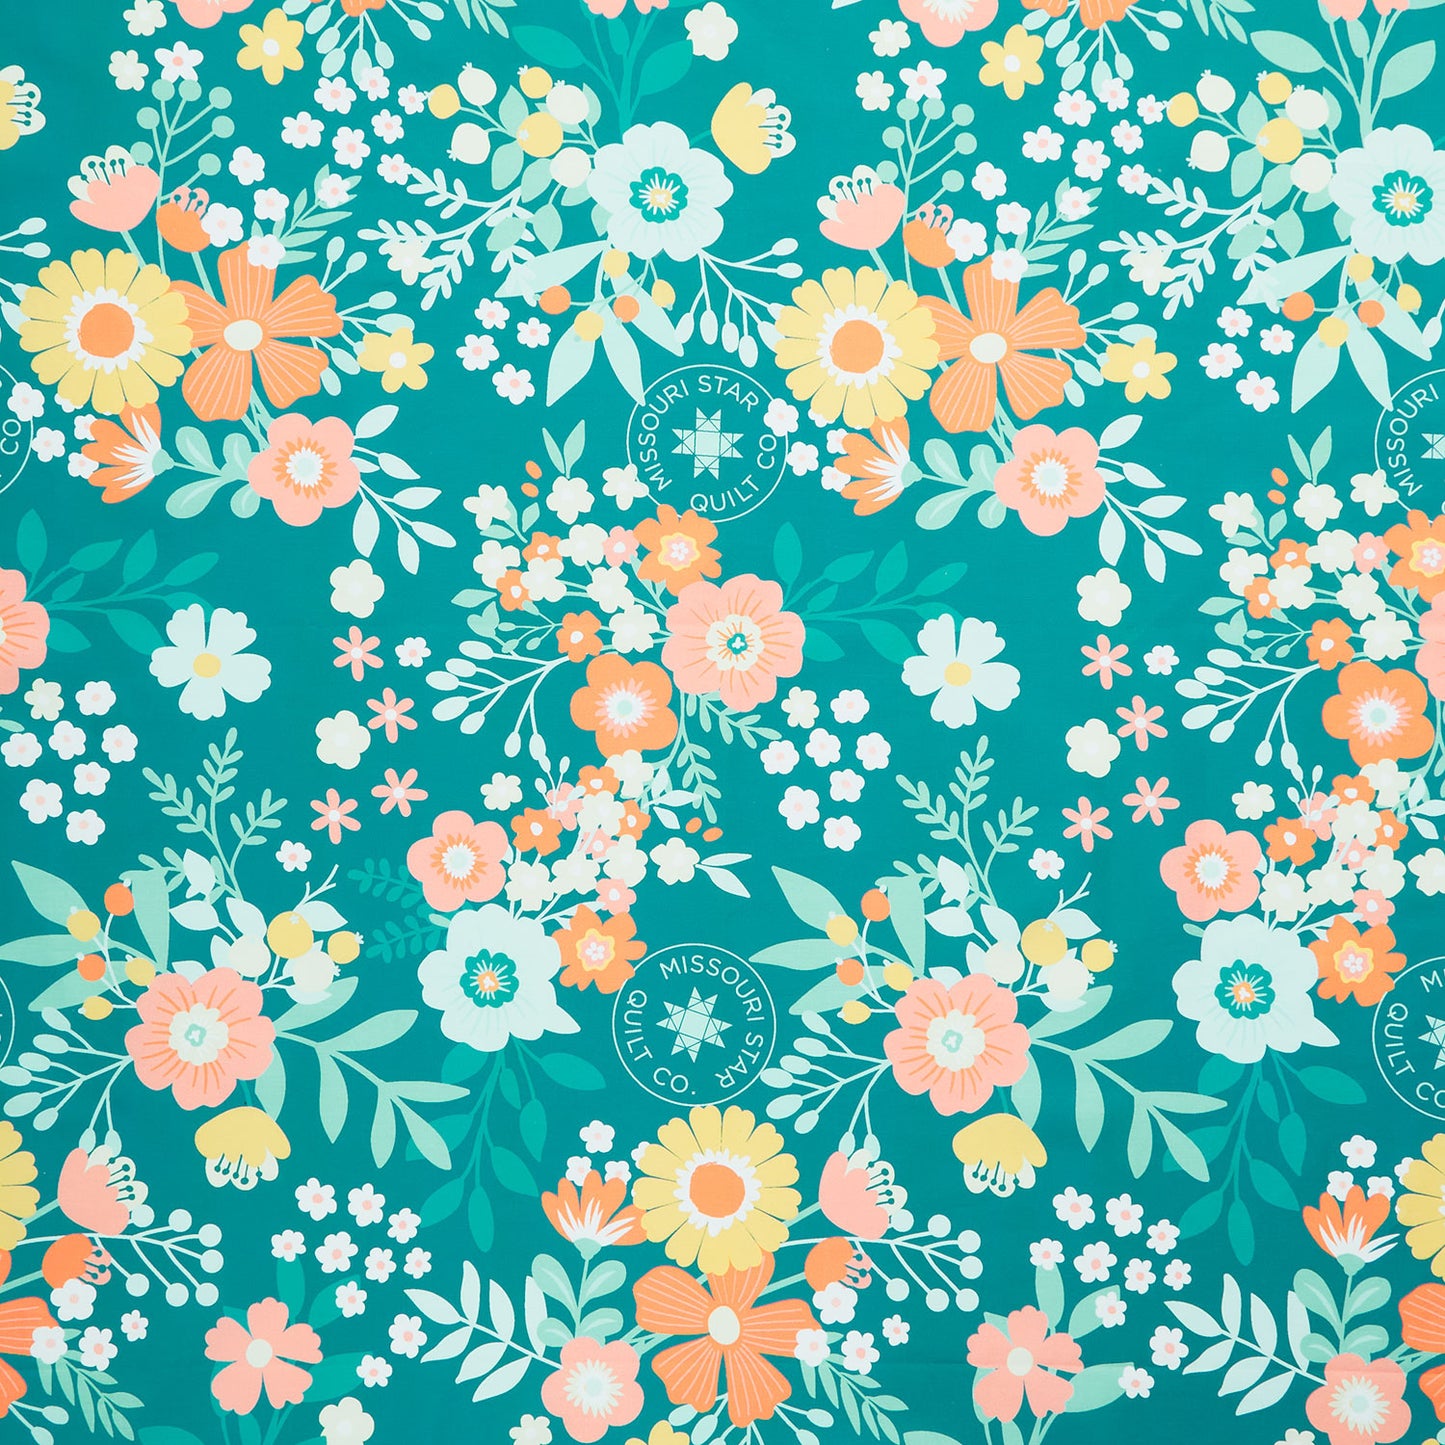 Missouri Star Quilt Backs - Quilt Town Large Teal Floral 110" Wide Backing Primary Image